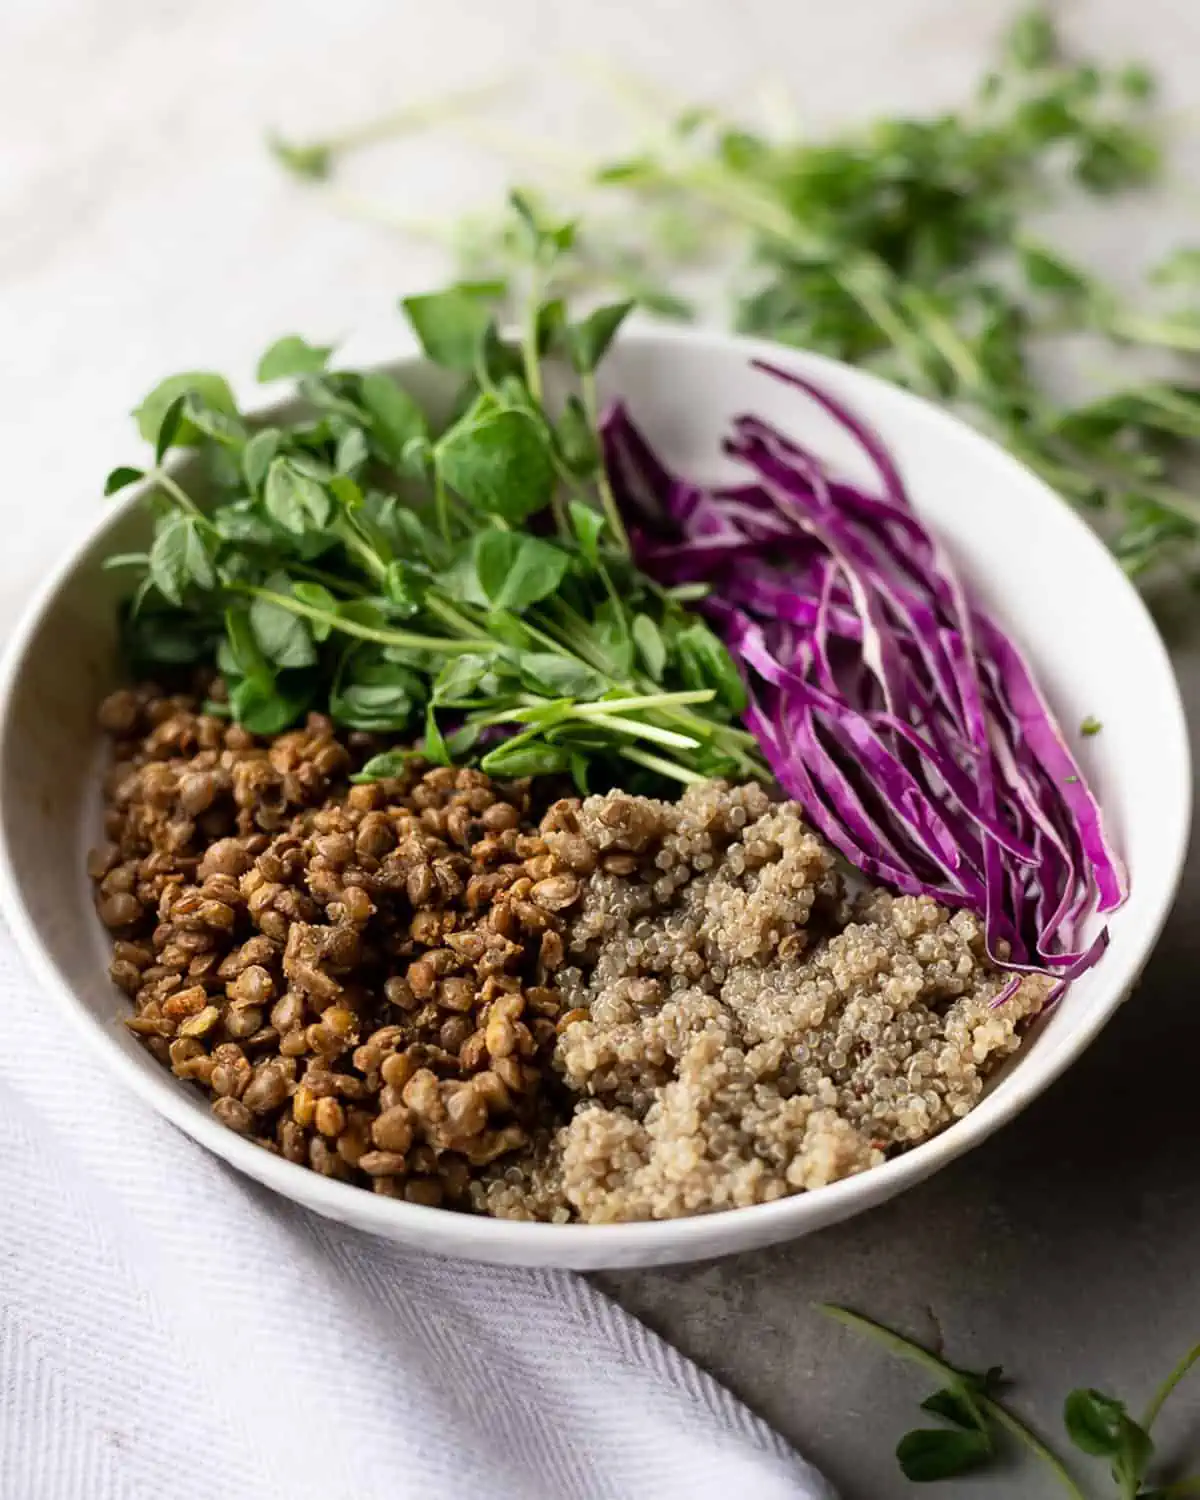 Close up image of a bowl of spiced brown lentils, quinoa, fresh arugula, and sliced cabbage. Image is for a recipe post on how cook bown lentils.